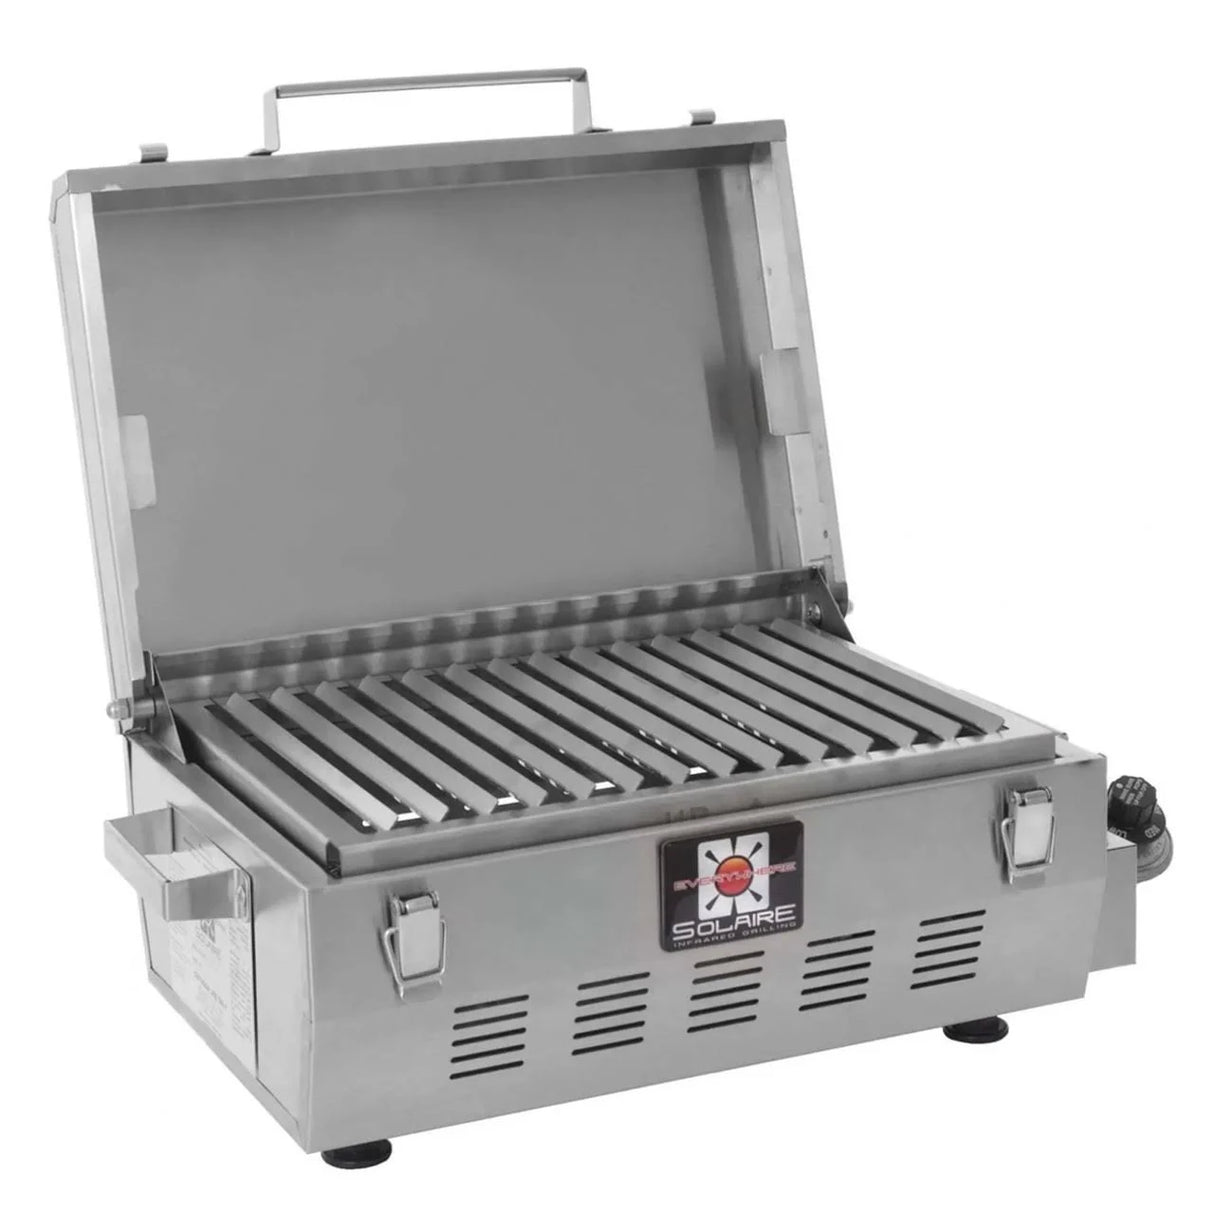 Solaire Everywhere Portable Infrared Grill